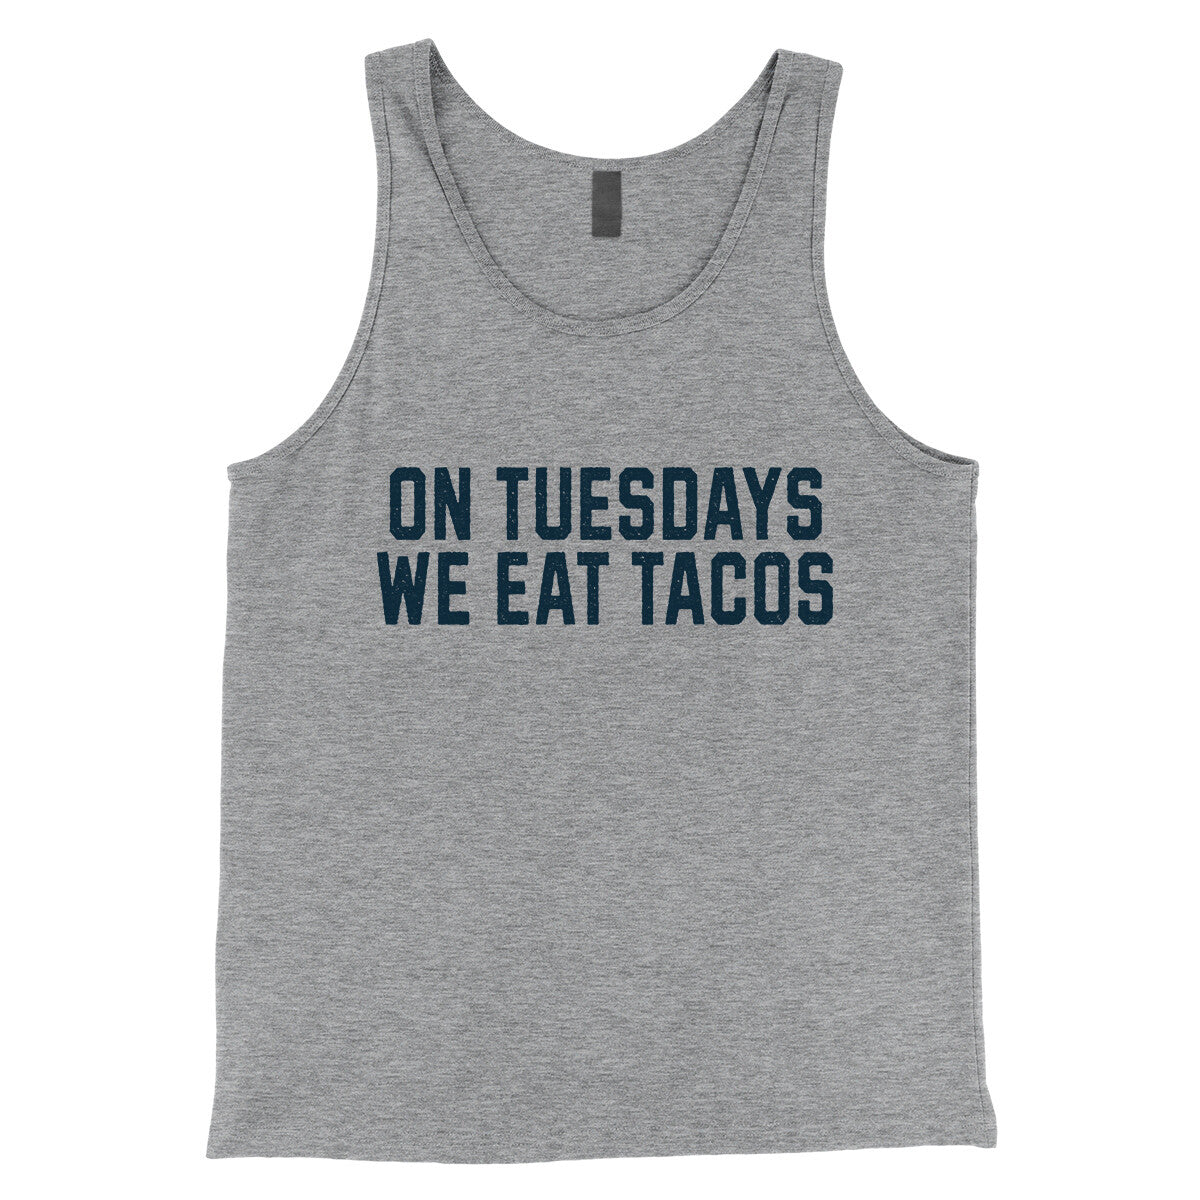 On Tuesdays We Eat Tacos in Athletic Heather Color